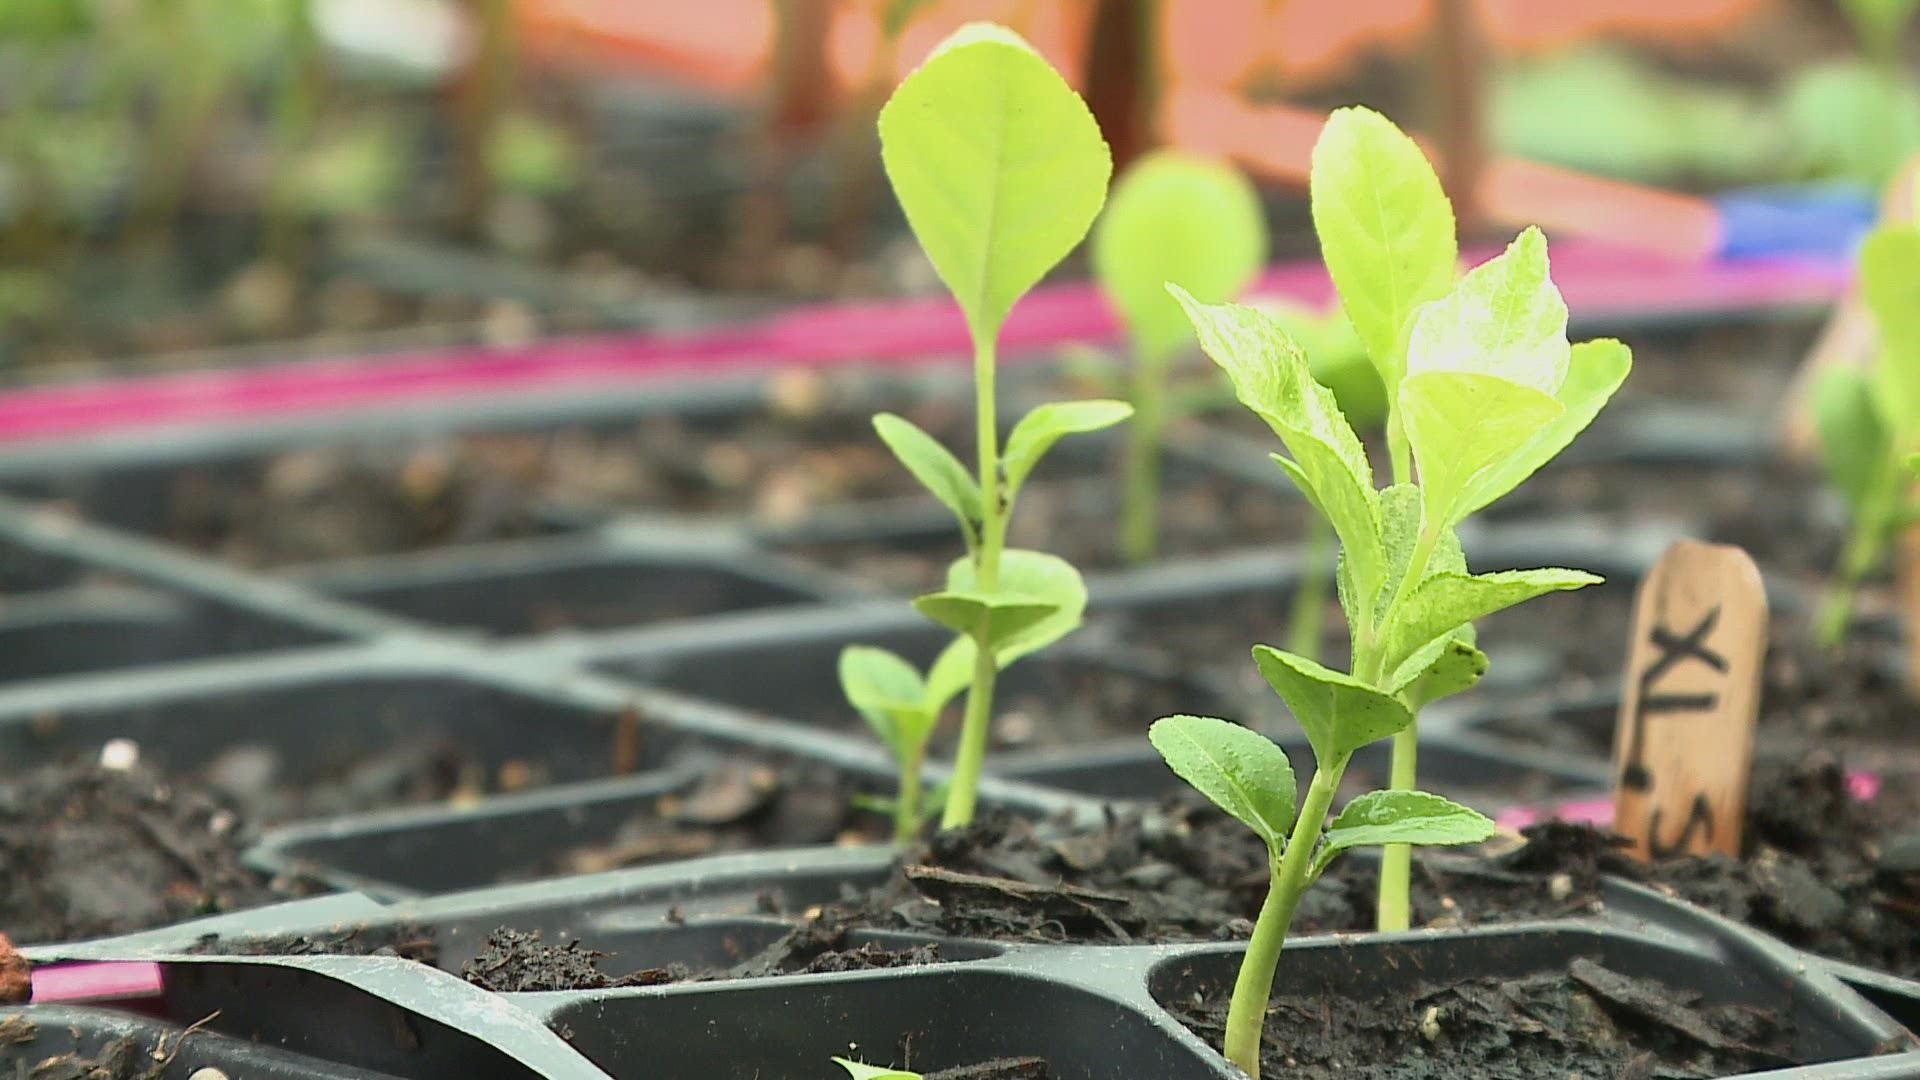 Goronson Farm said it will take four years before the trees are ready to produce fruit for the festival, but is offering a limited number of seedlings on Friday.